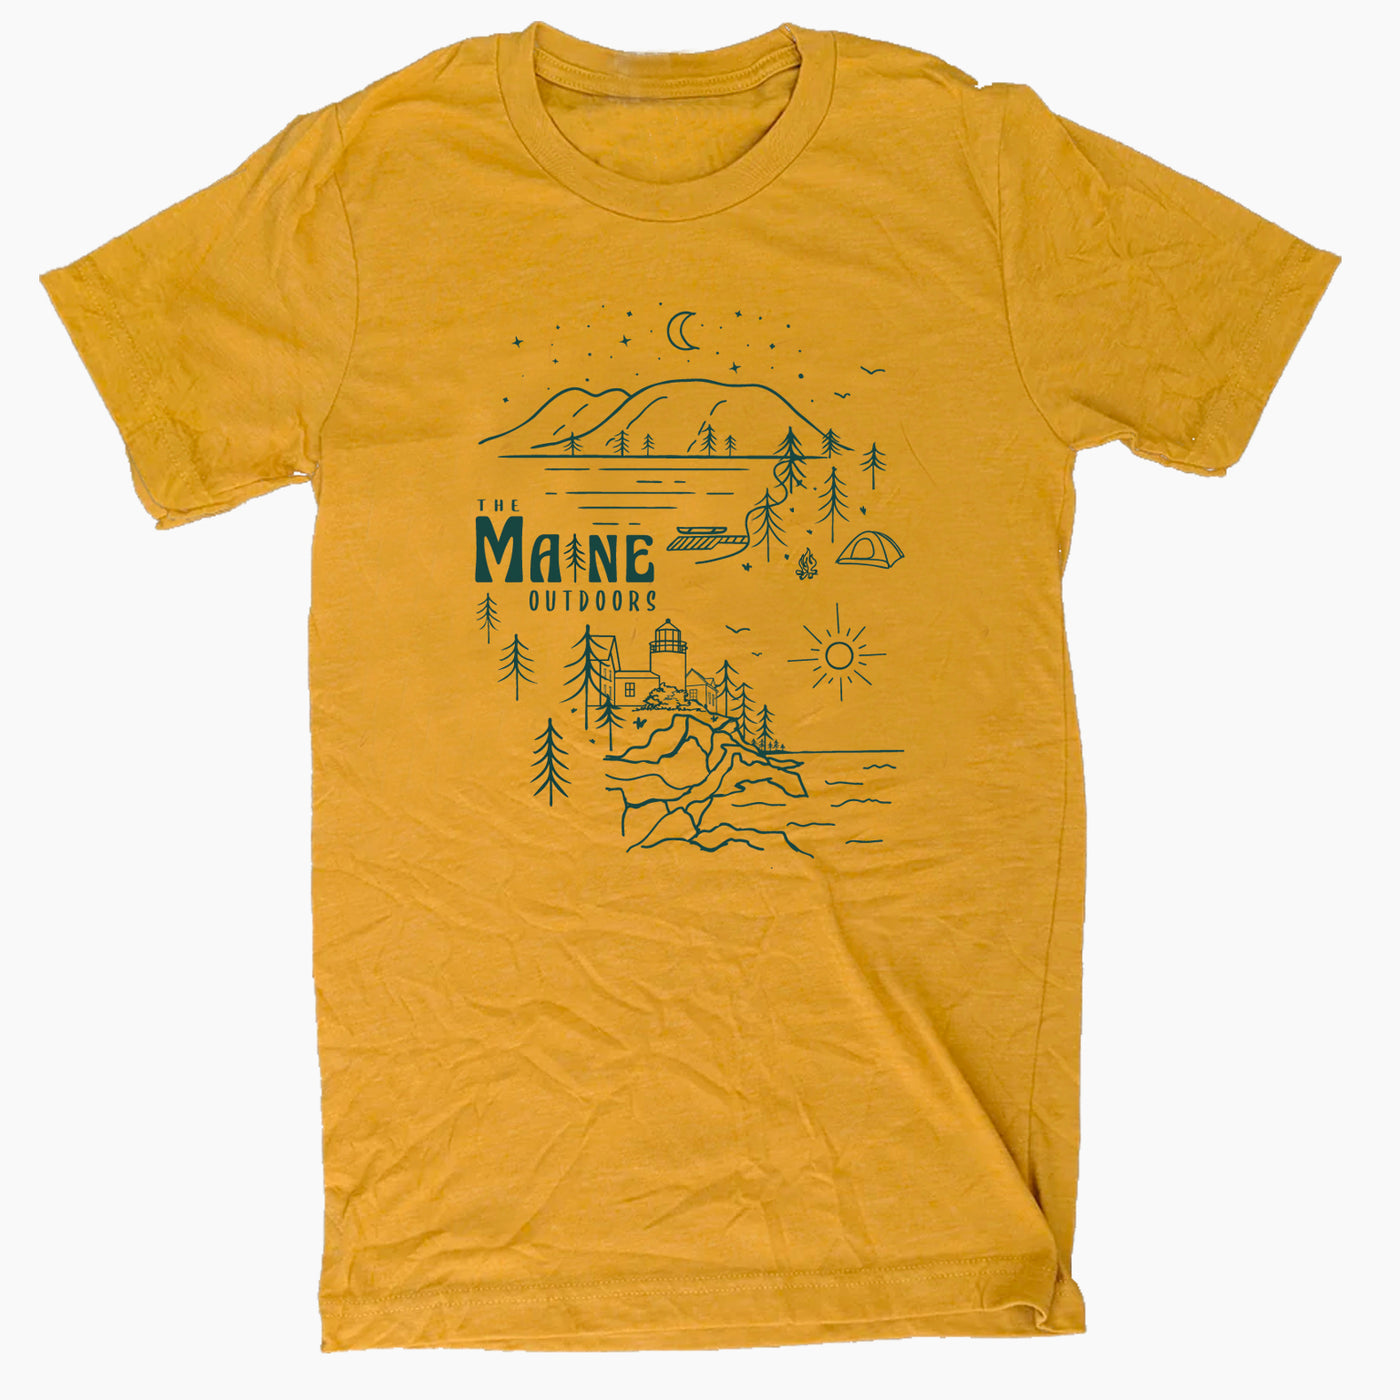 The Maine Outdoors T-Shirt